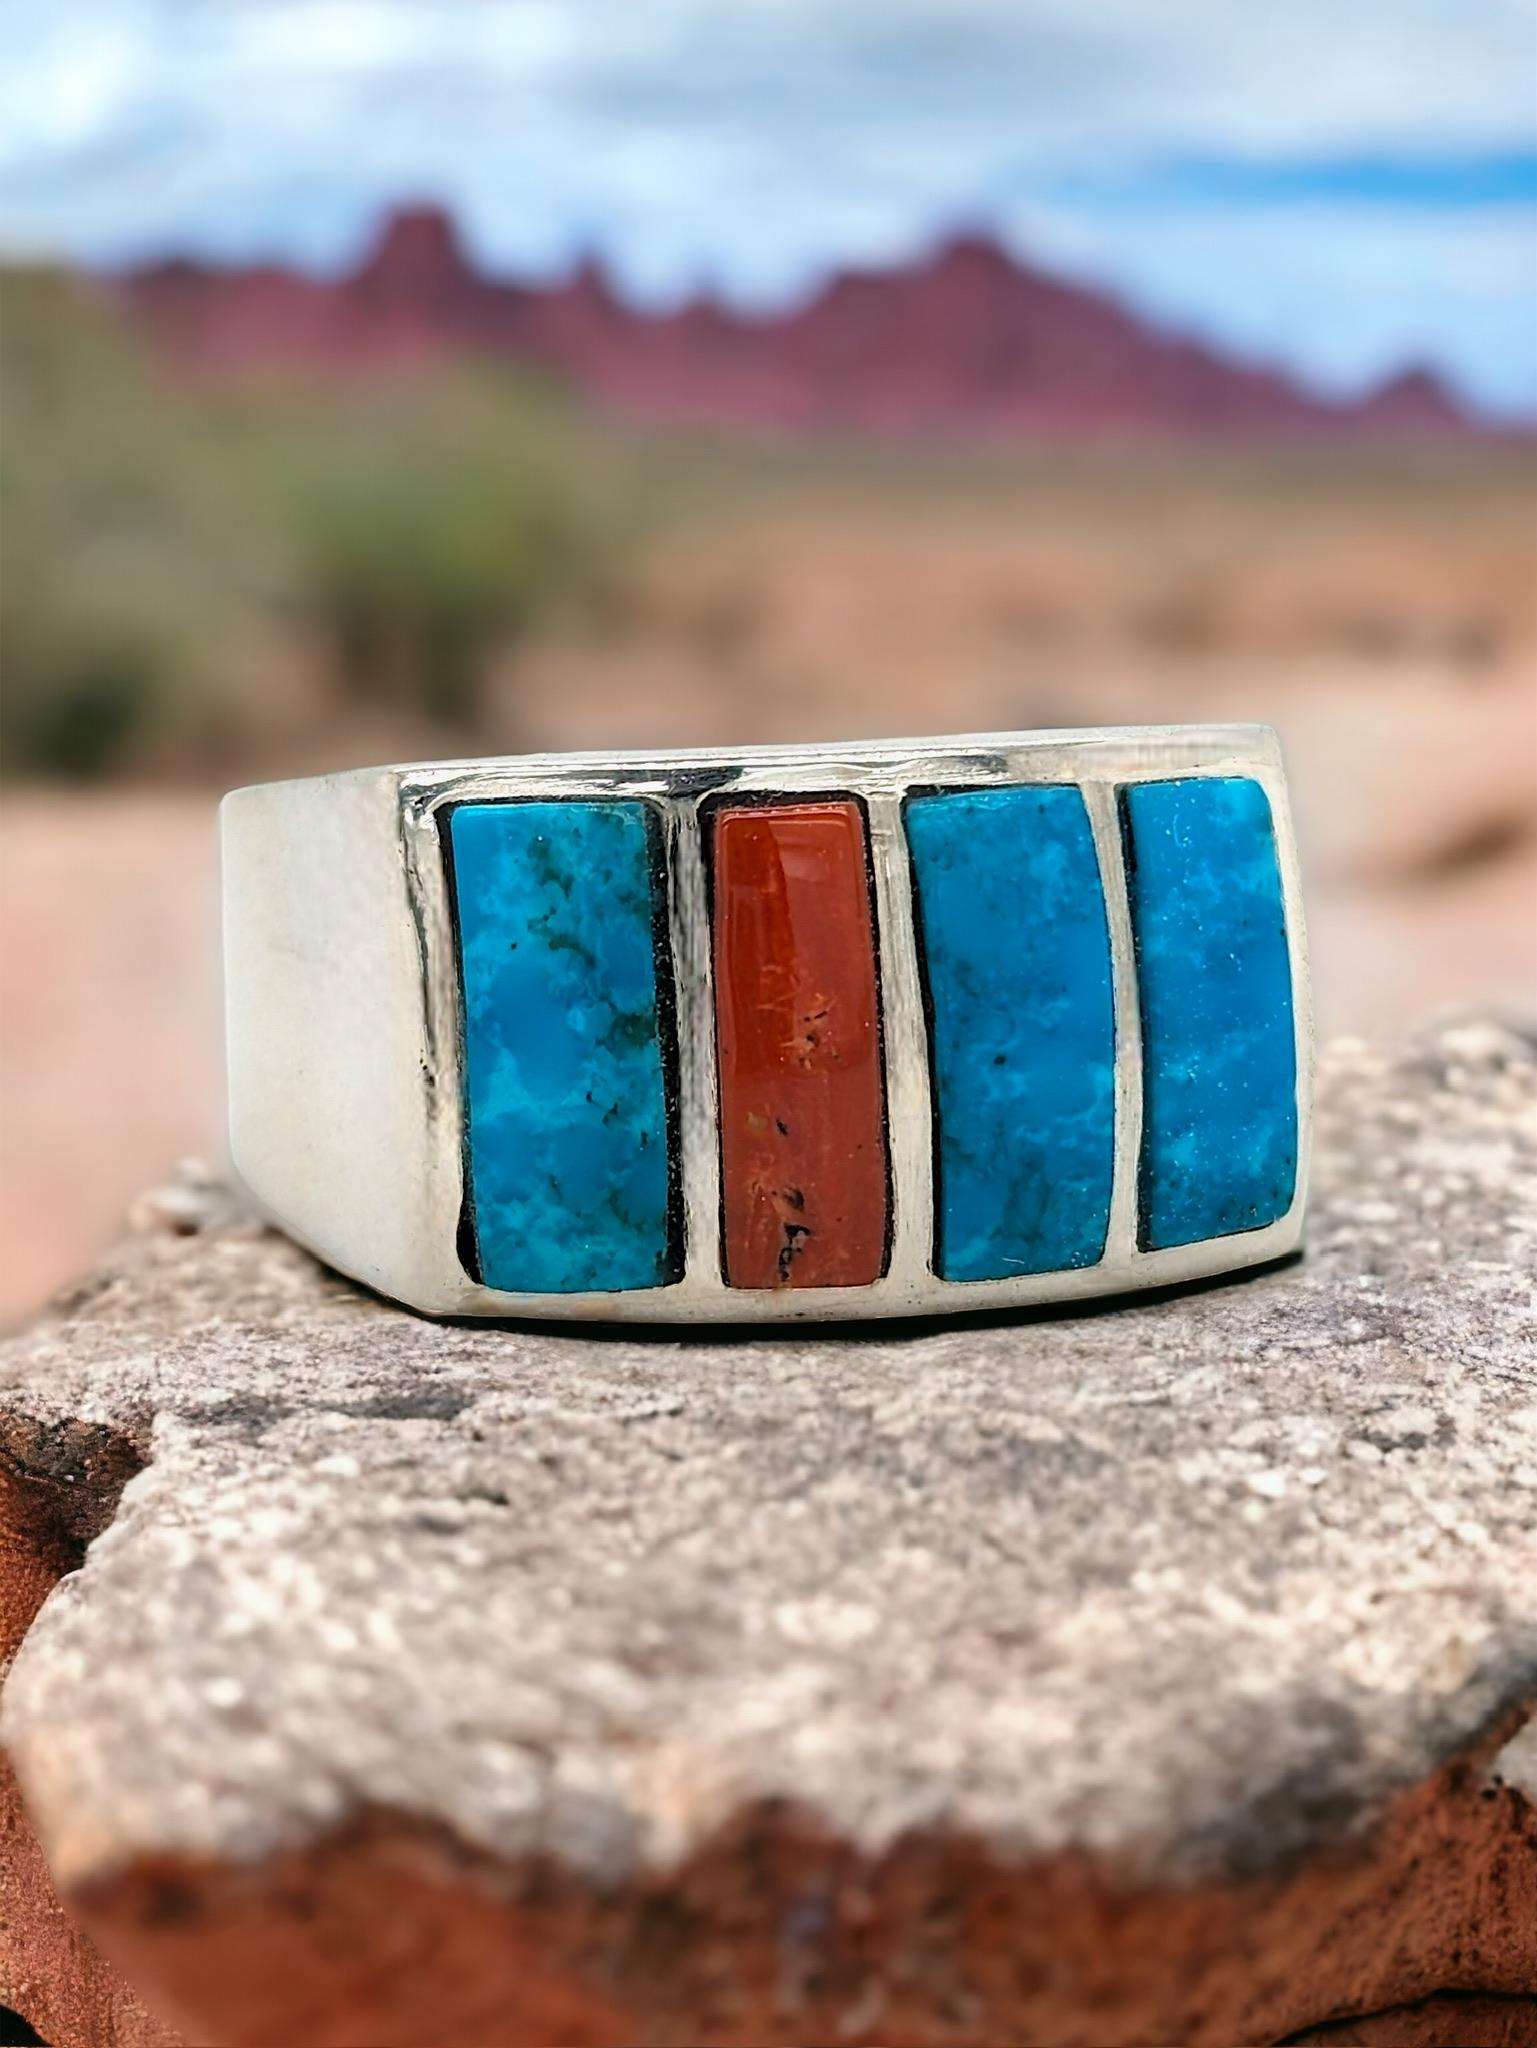 This handcrafted sterling silver ring features a captivating three-stone design symbolizing past, present, and future. Genuine turquoise takes center stage, flanked by fiery red coral gemstones, a classic combination in Southwestern